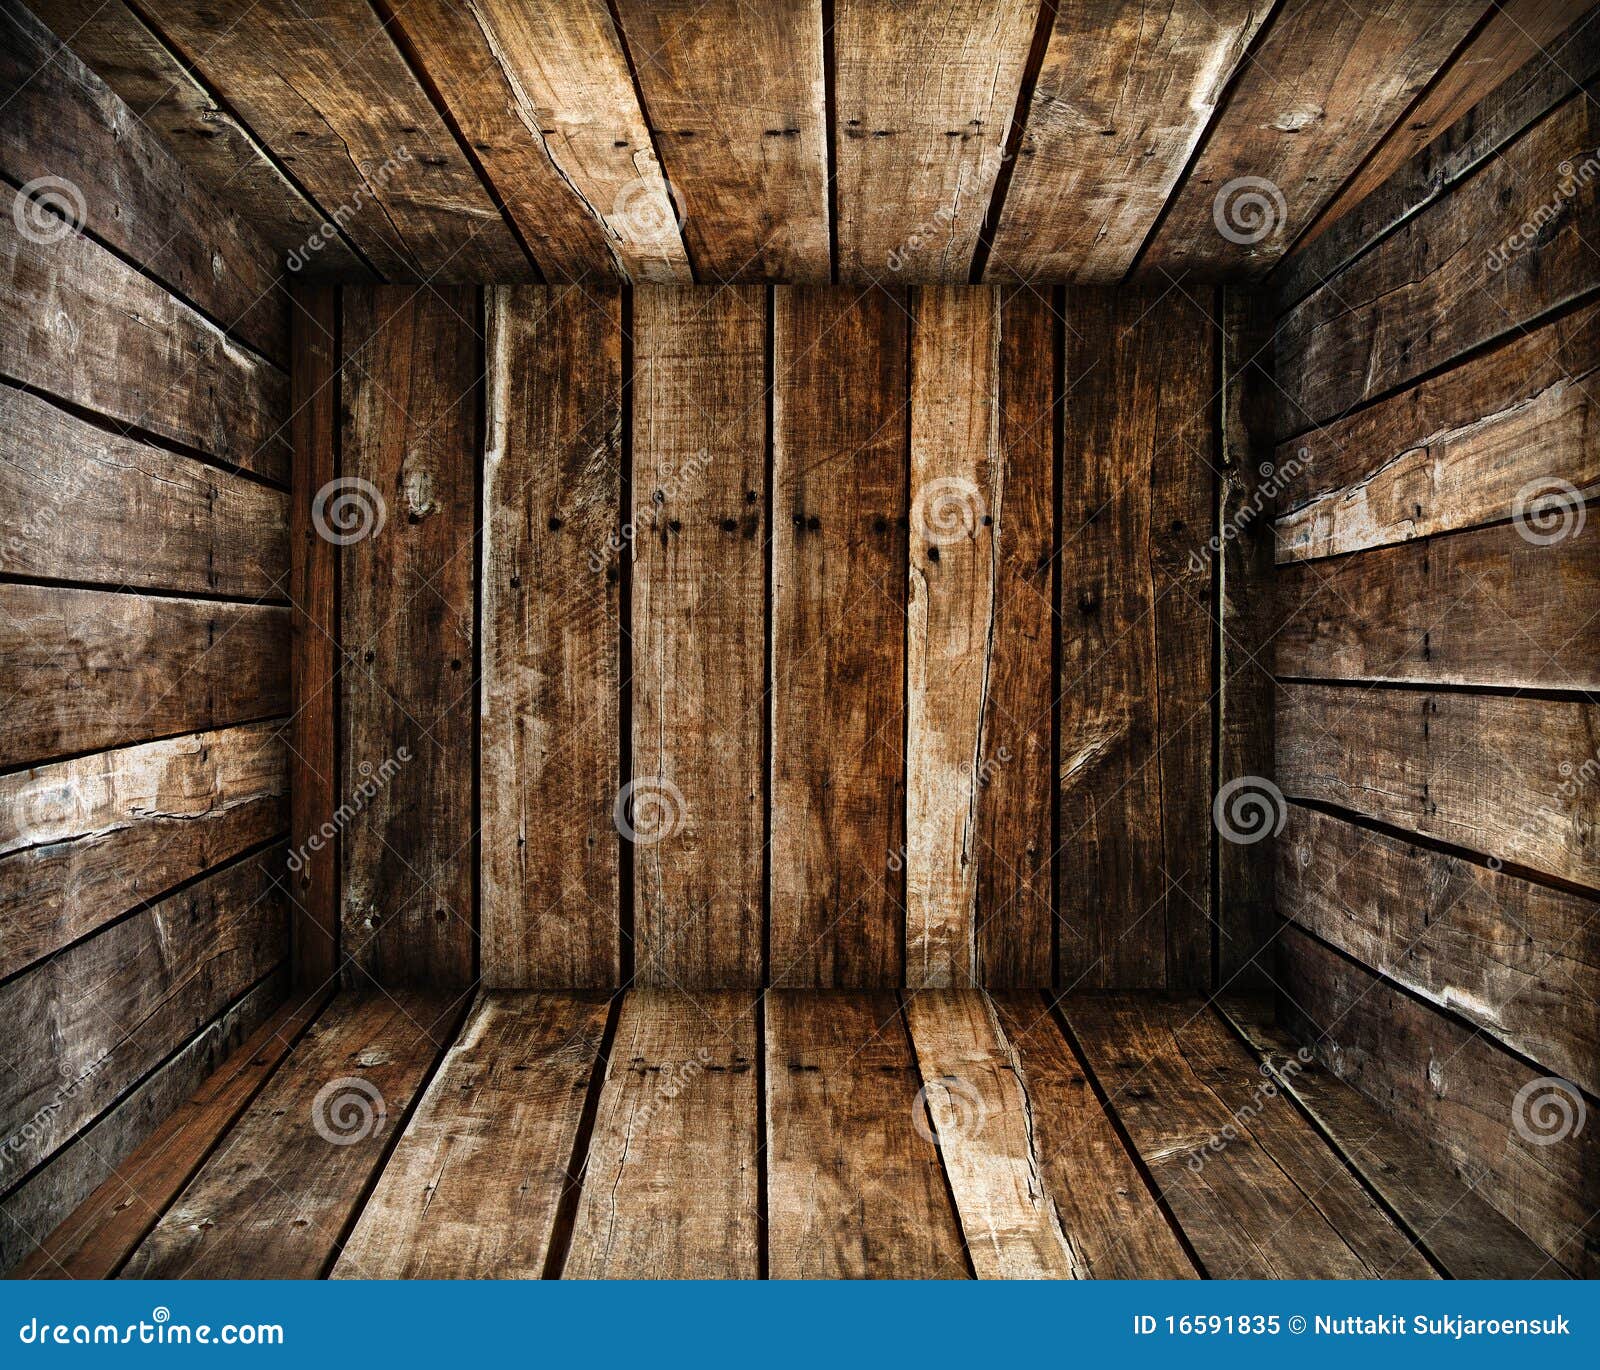 Cargo Box. Wooden Box. Stock Photo, Picture and Royalty Free Image. Image  123716795.